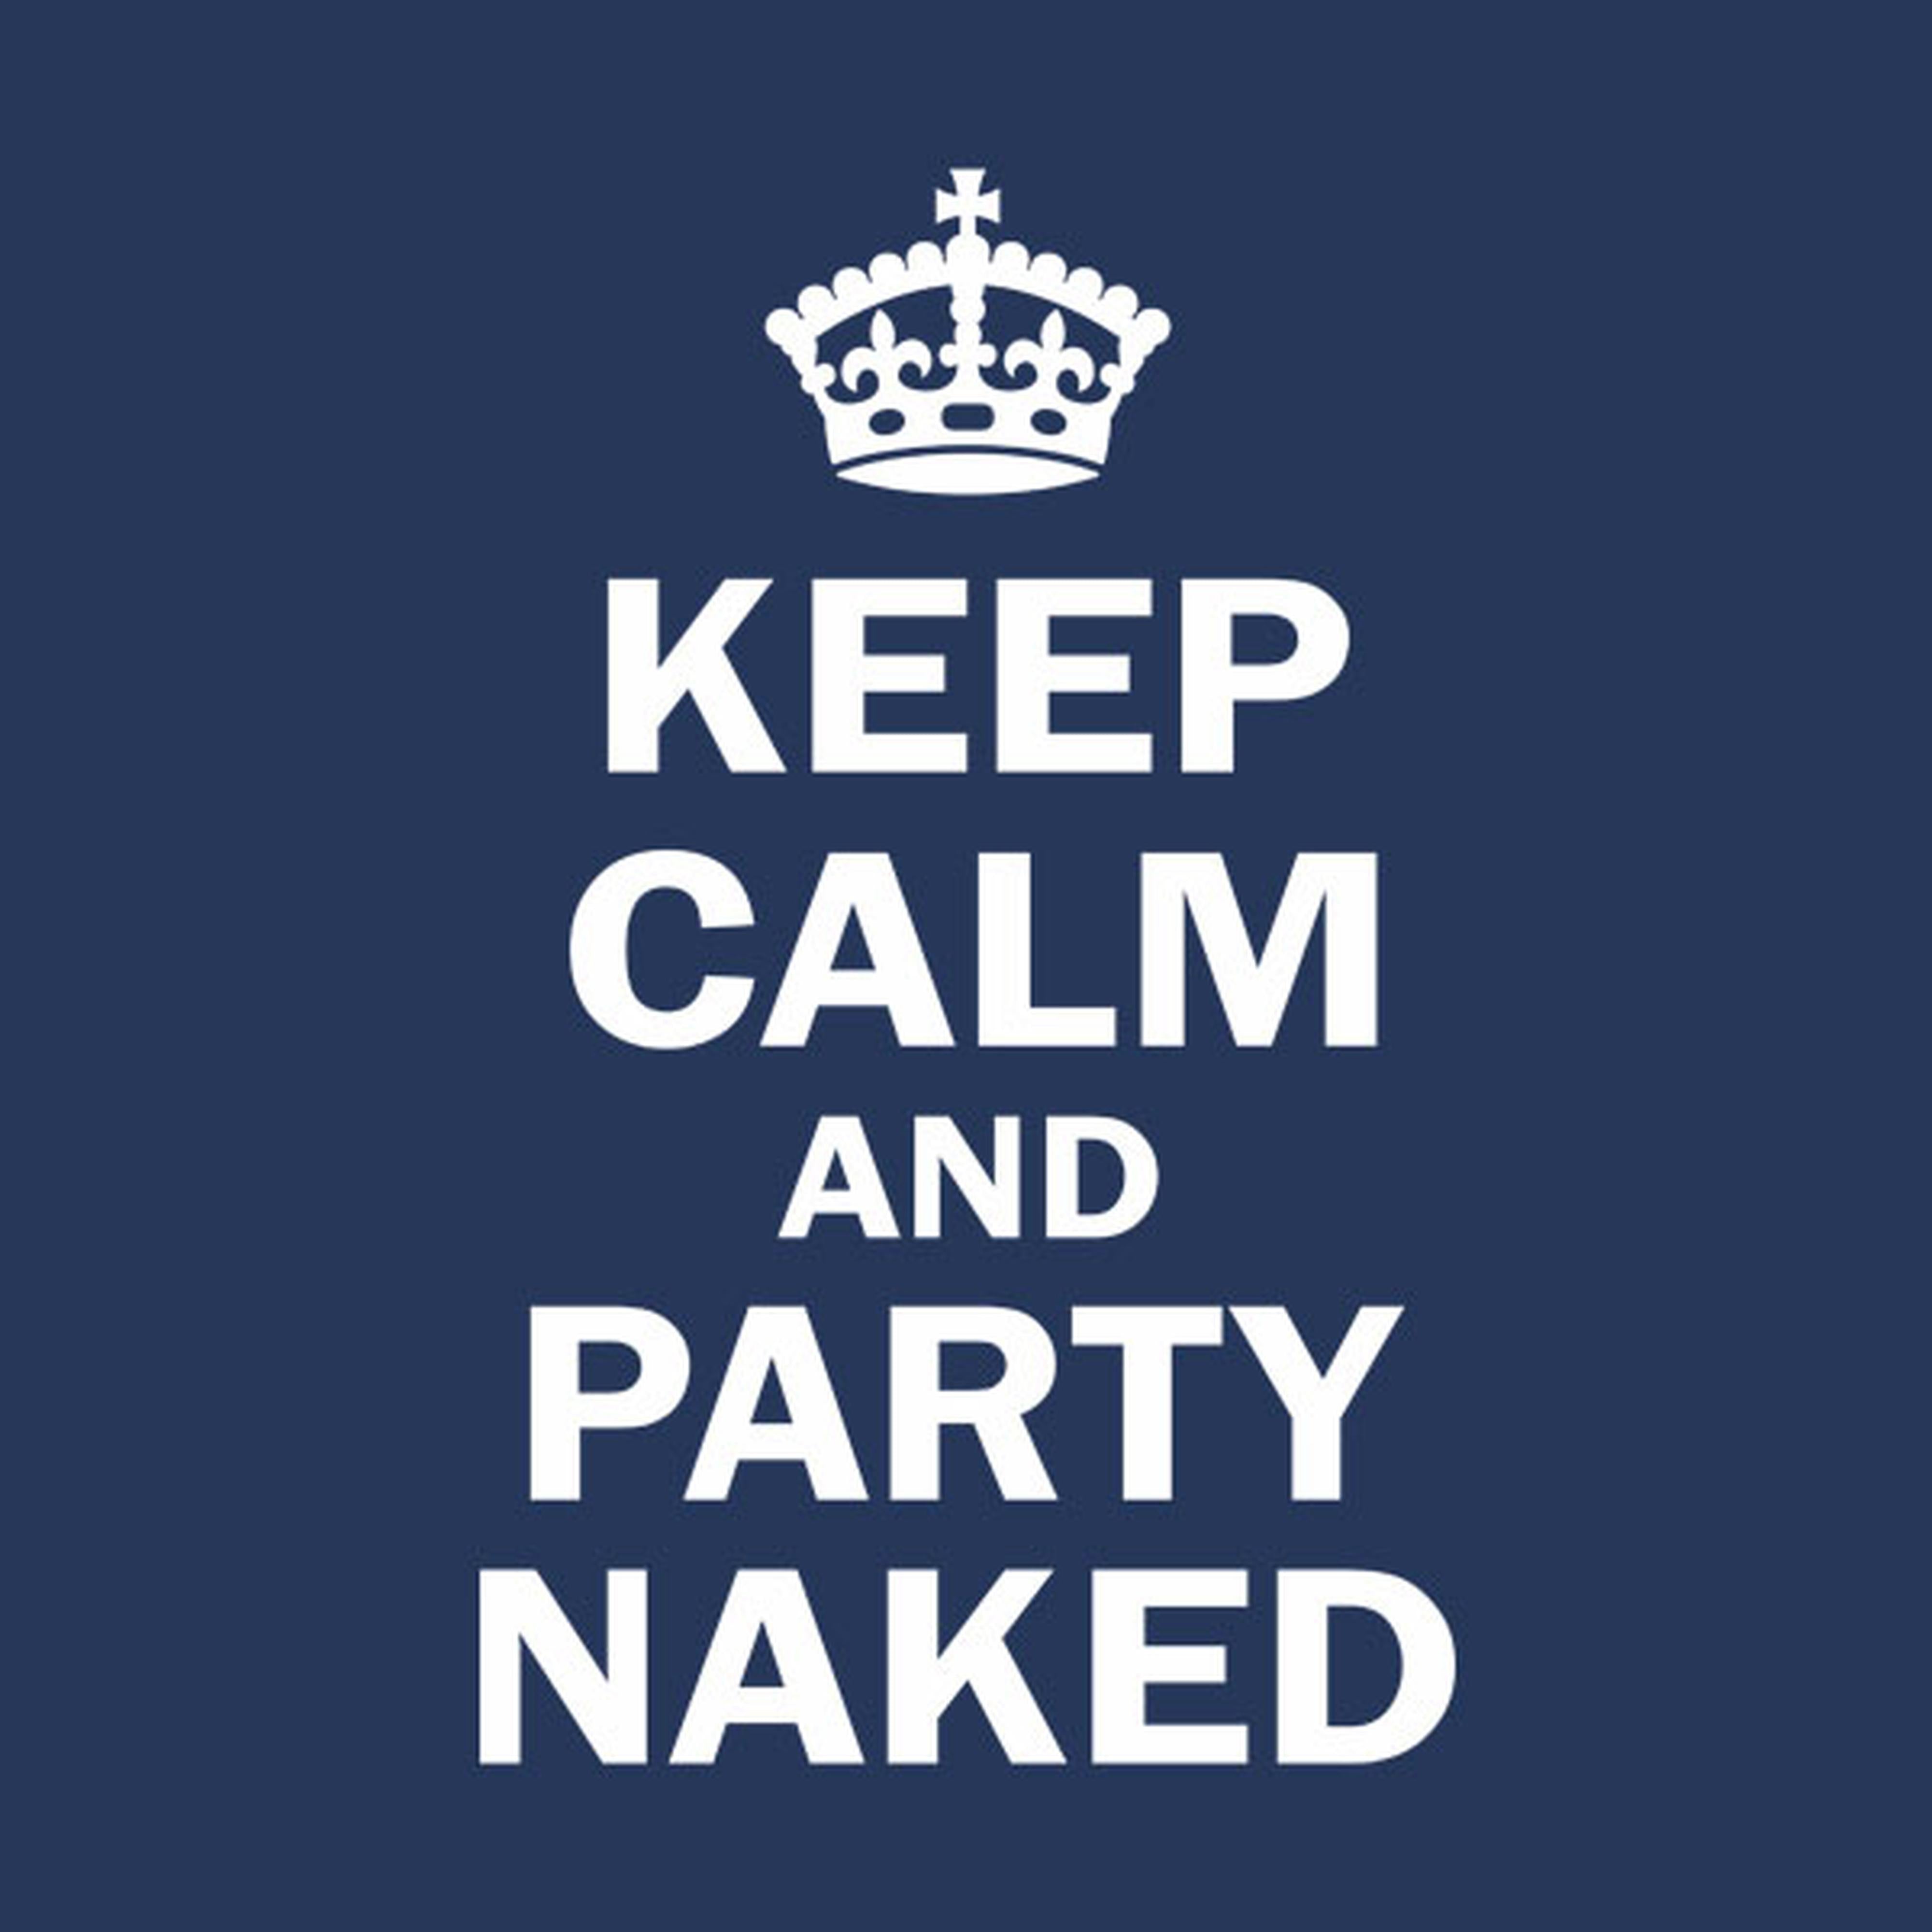 Keep calm and party naked - T-shirt